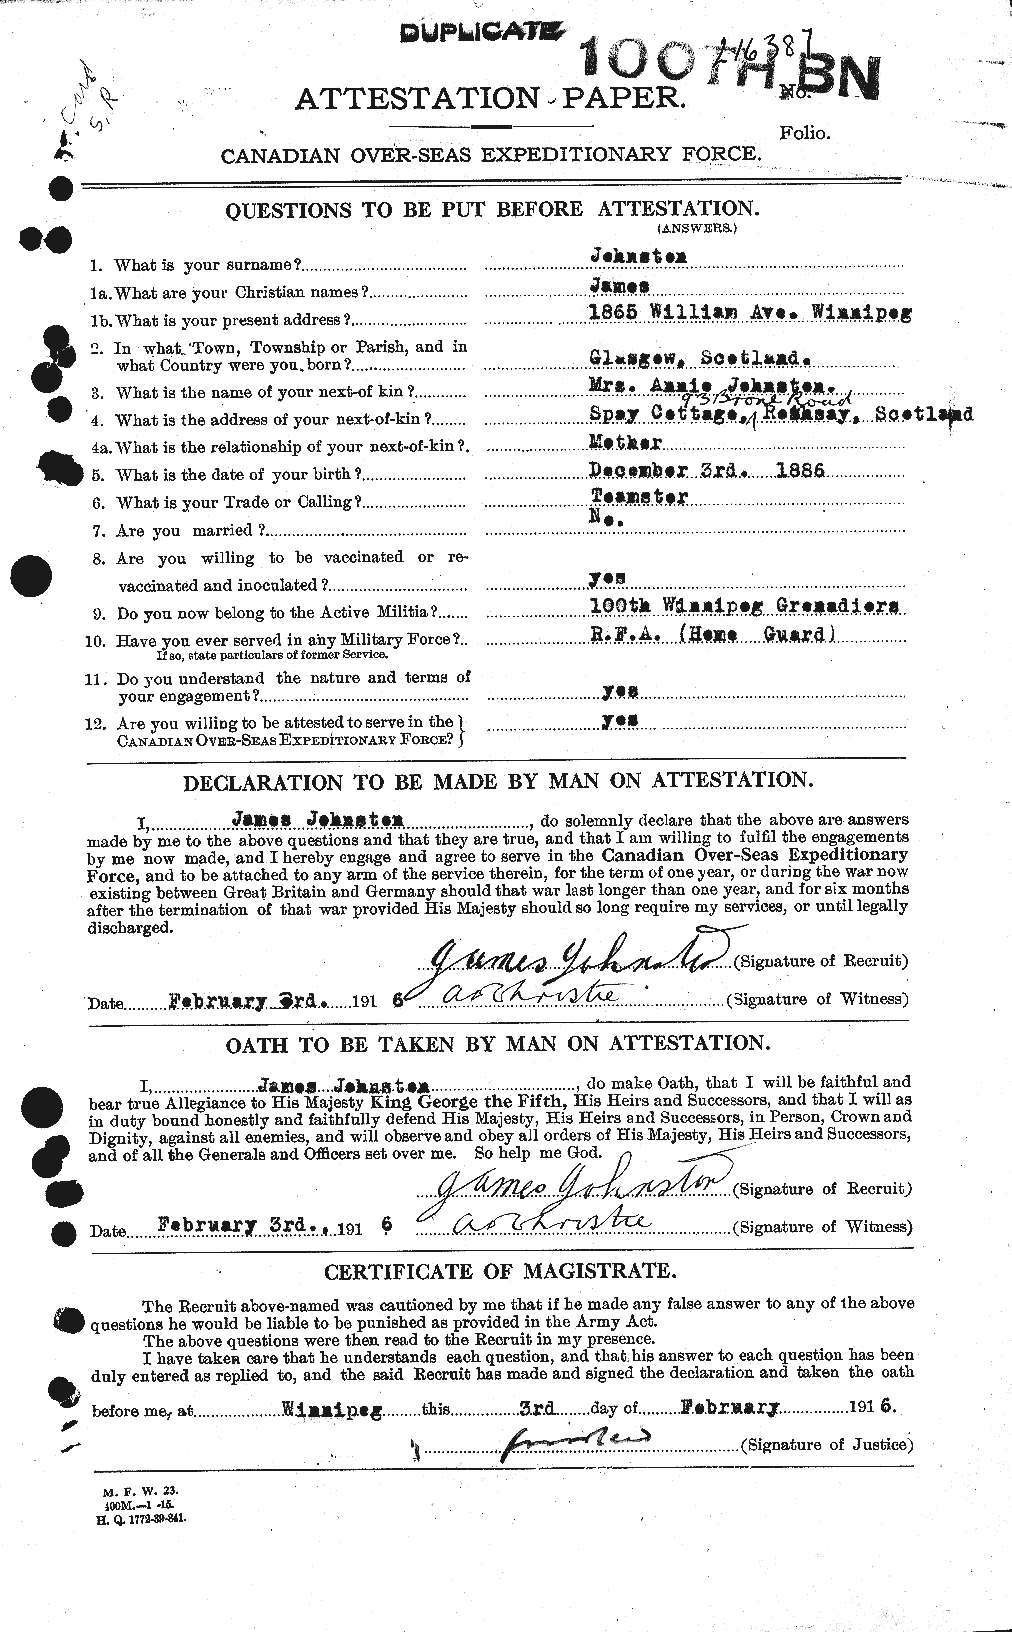 Personnel Records of the First World War - CEF 422705a